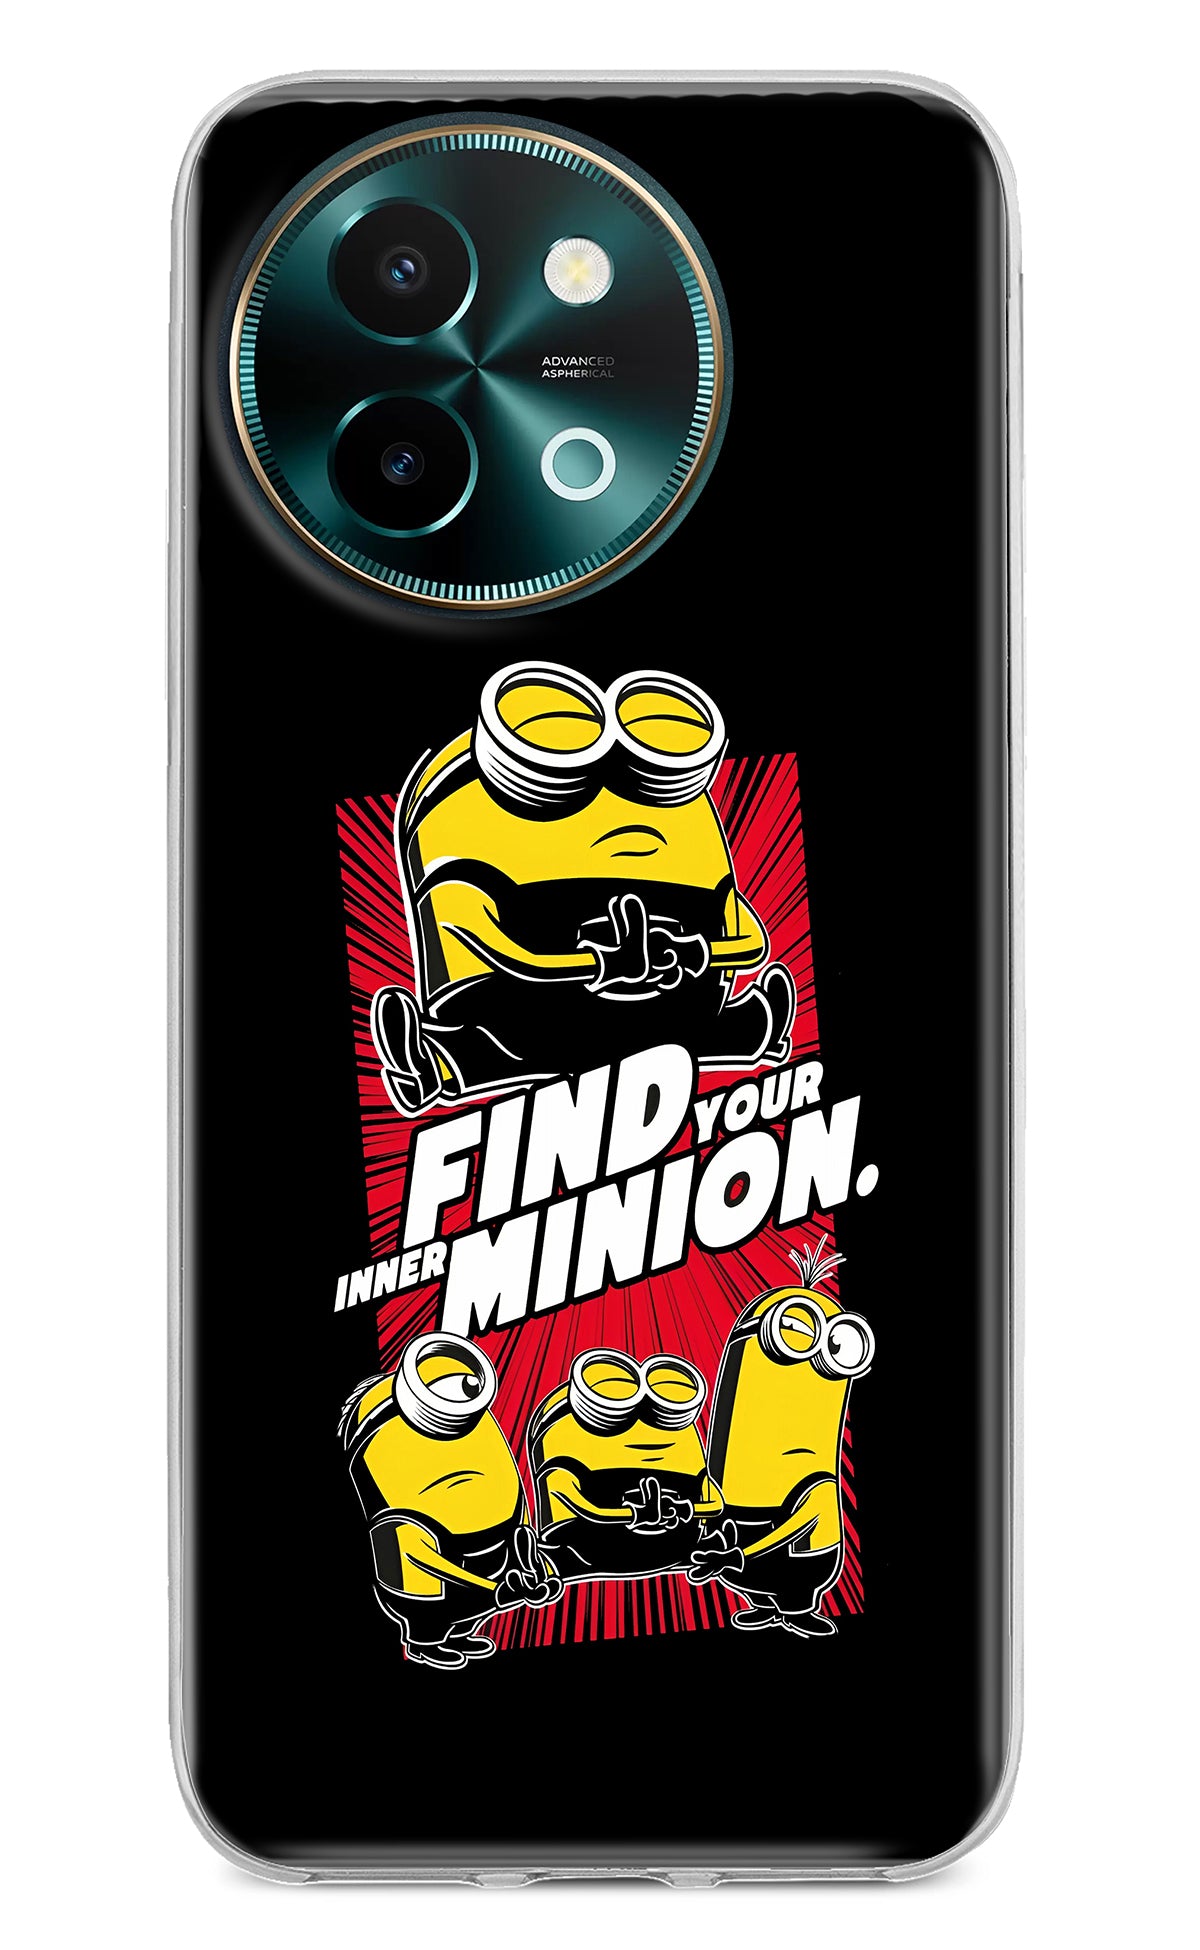 Find your inner Minion Vivo Y58 5G Back Cover